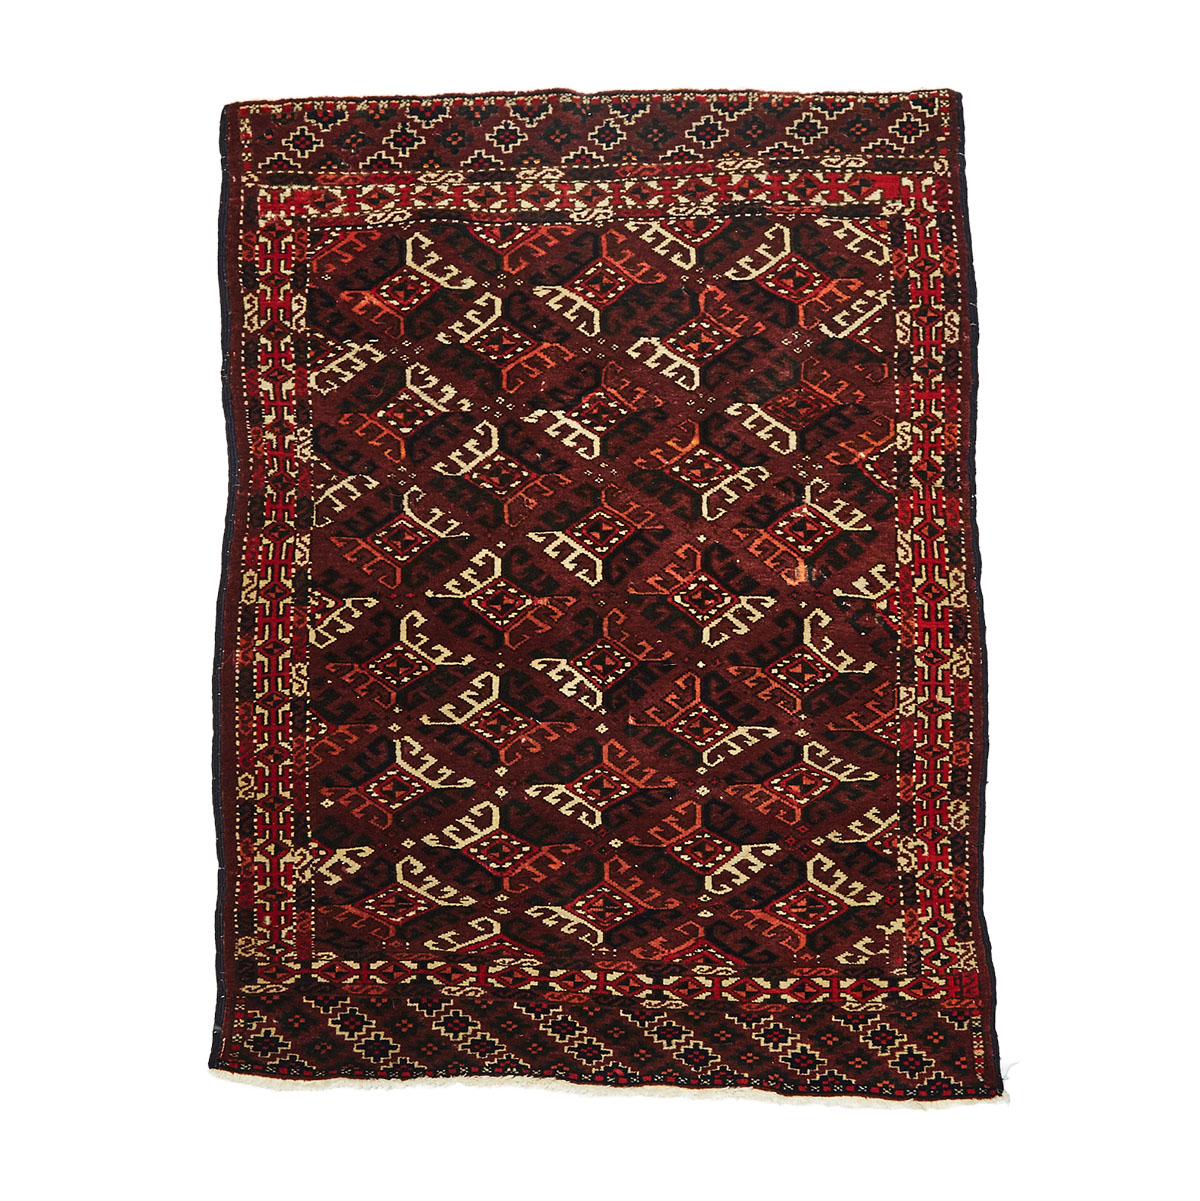 Yomud Small Rug, Central Asia, early 20th century